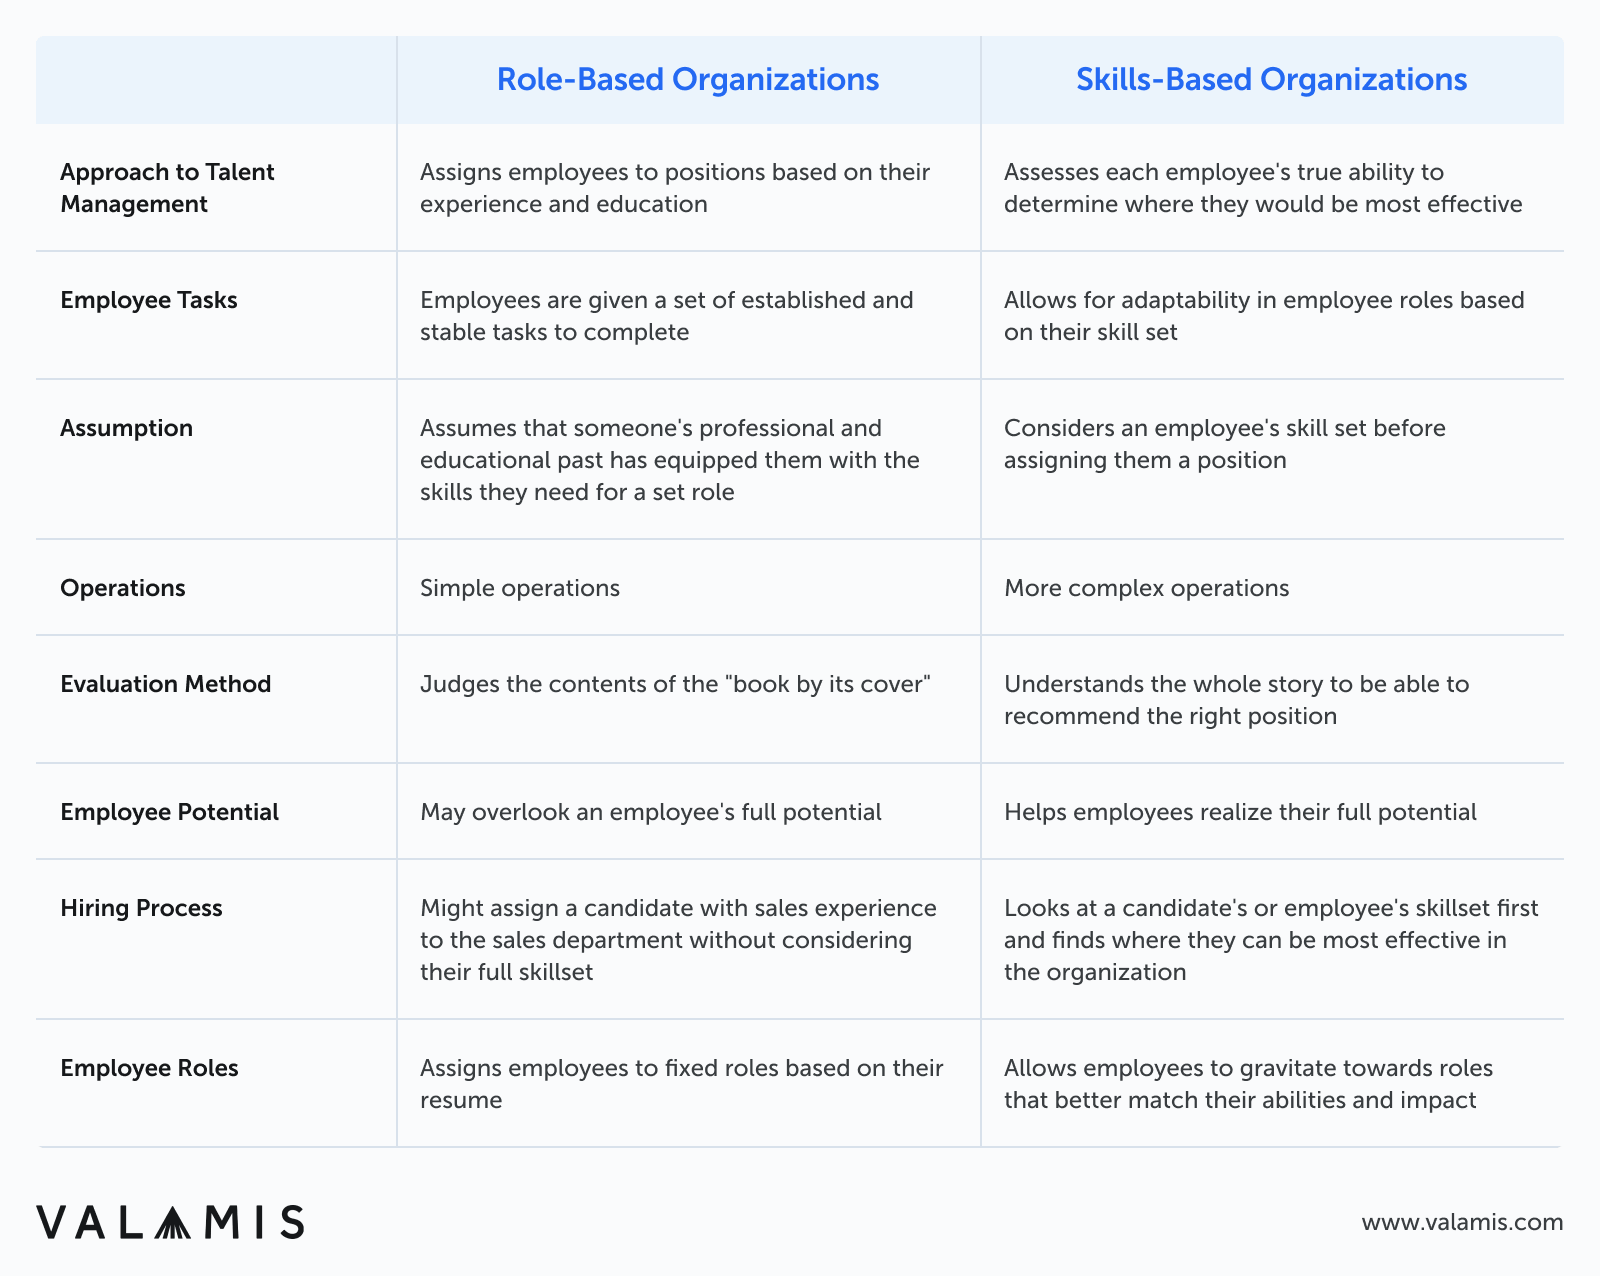 The image shows the list of differences between role-based and skills-based organizations